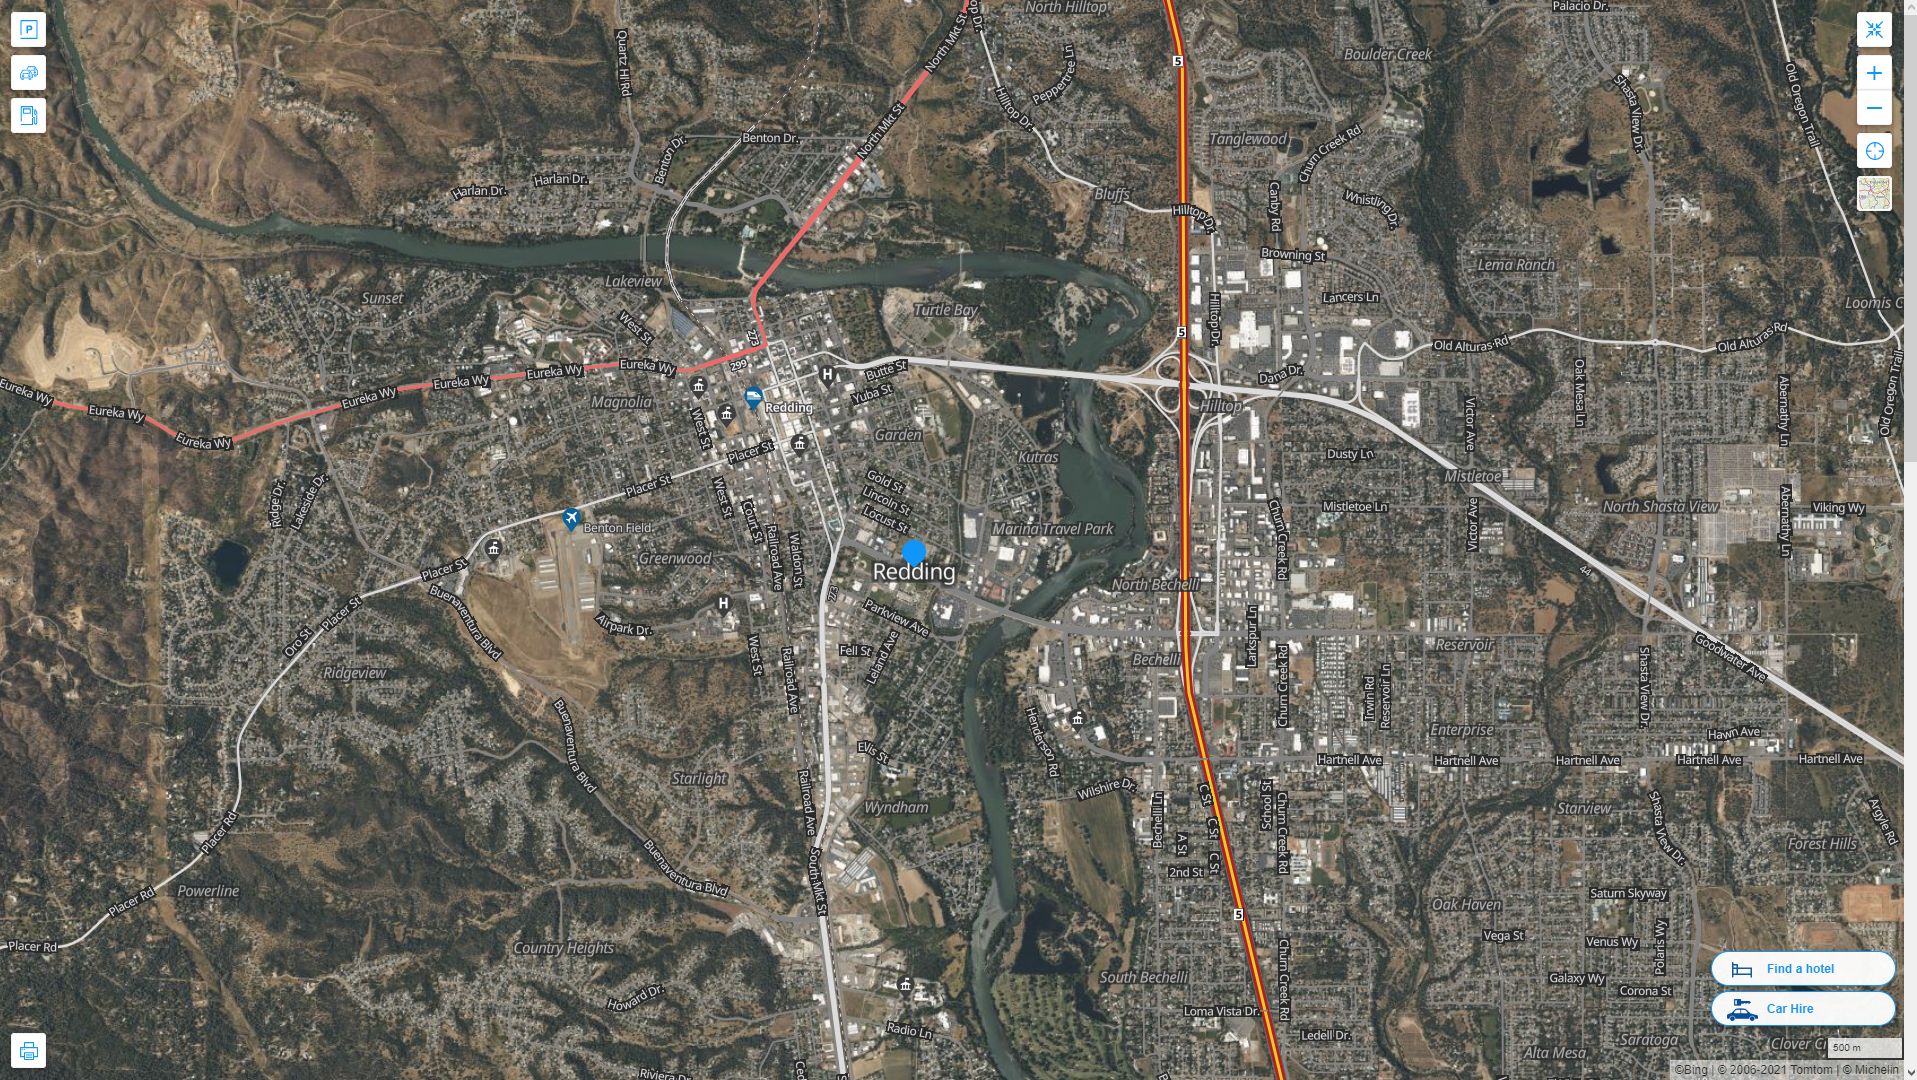 Redding California Highway and Road Map with Satellite View